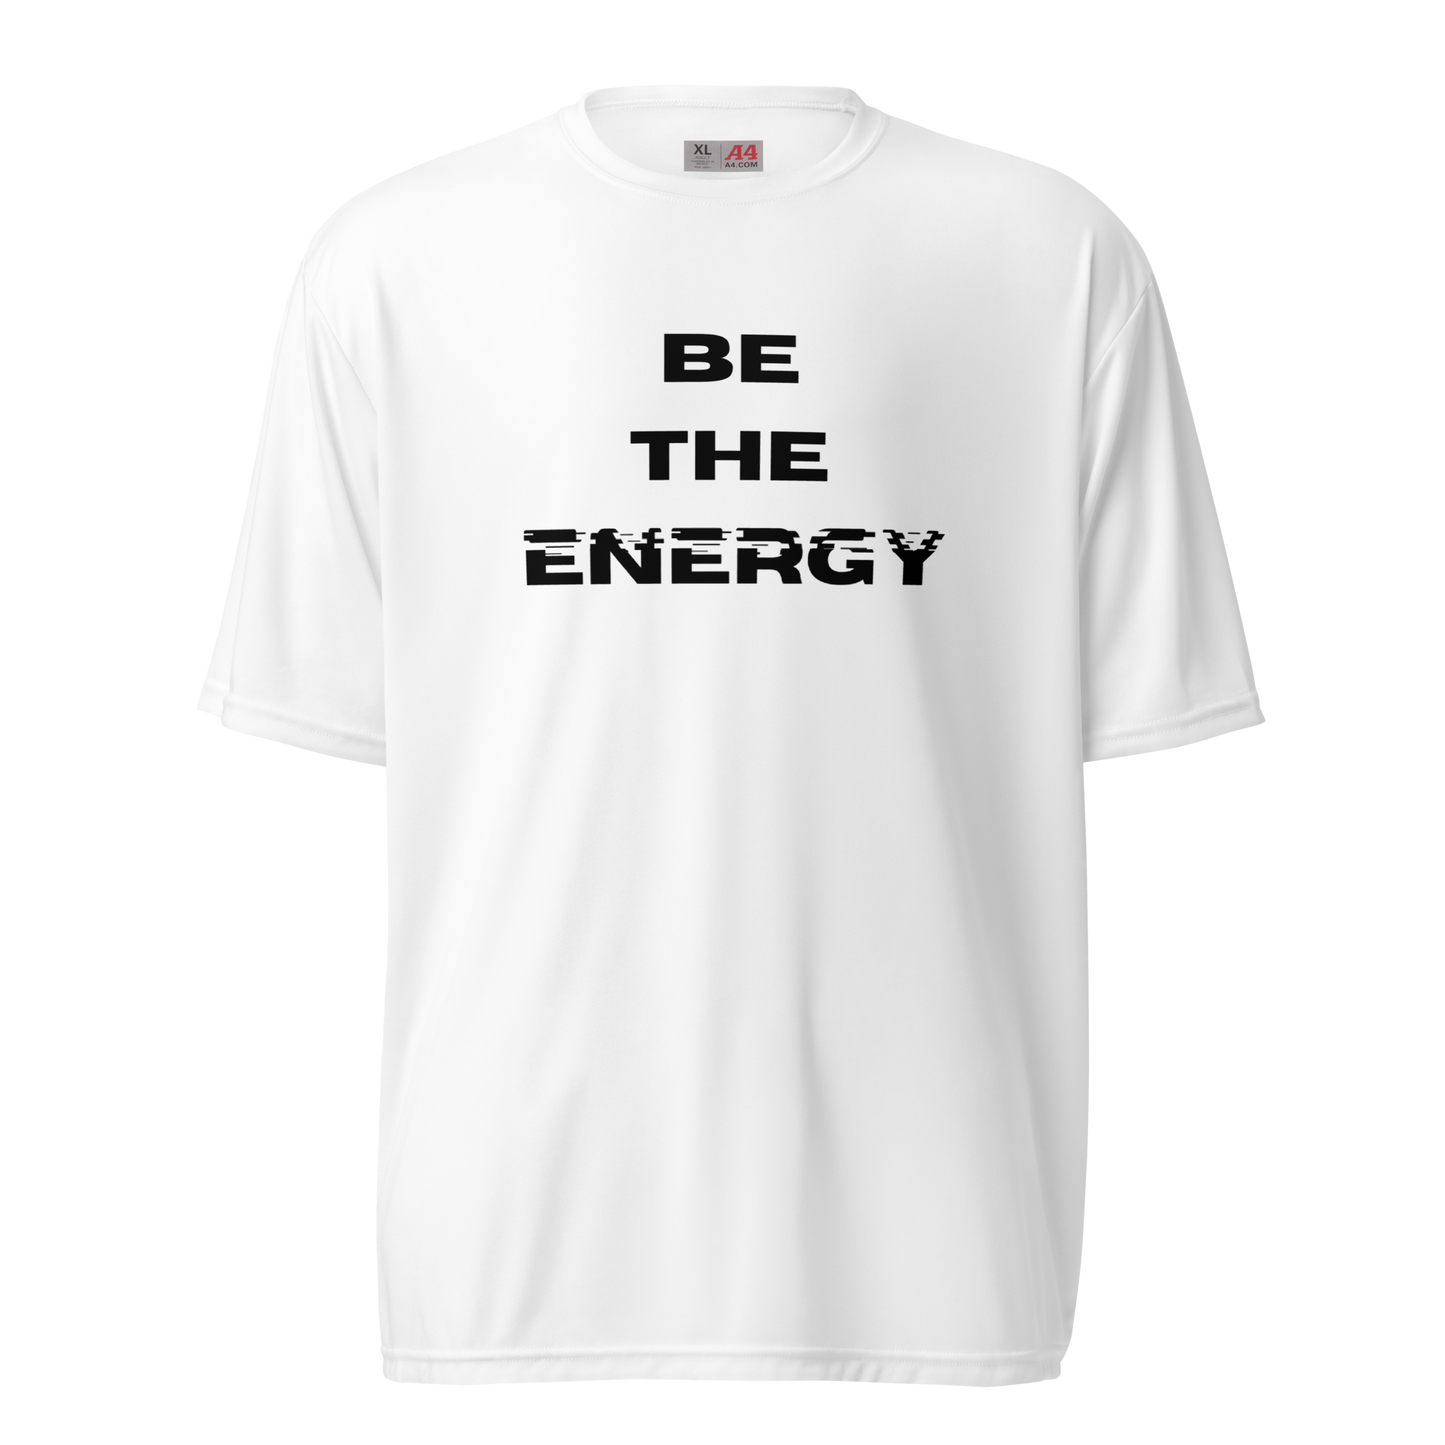 Be The Energy Tee *PRE-ORDER* (Only 10 available)